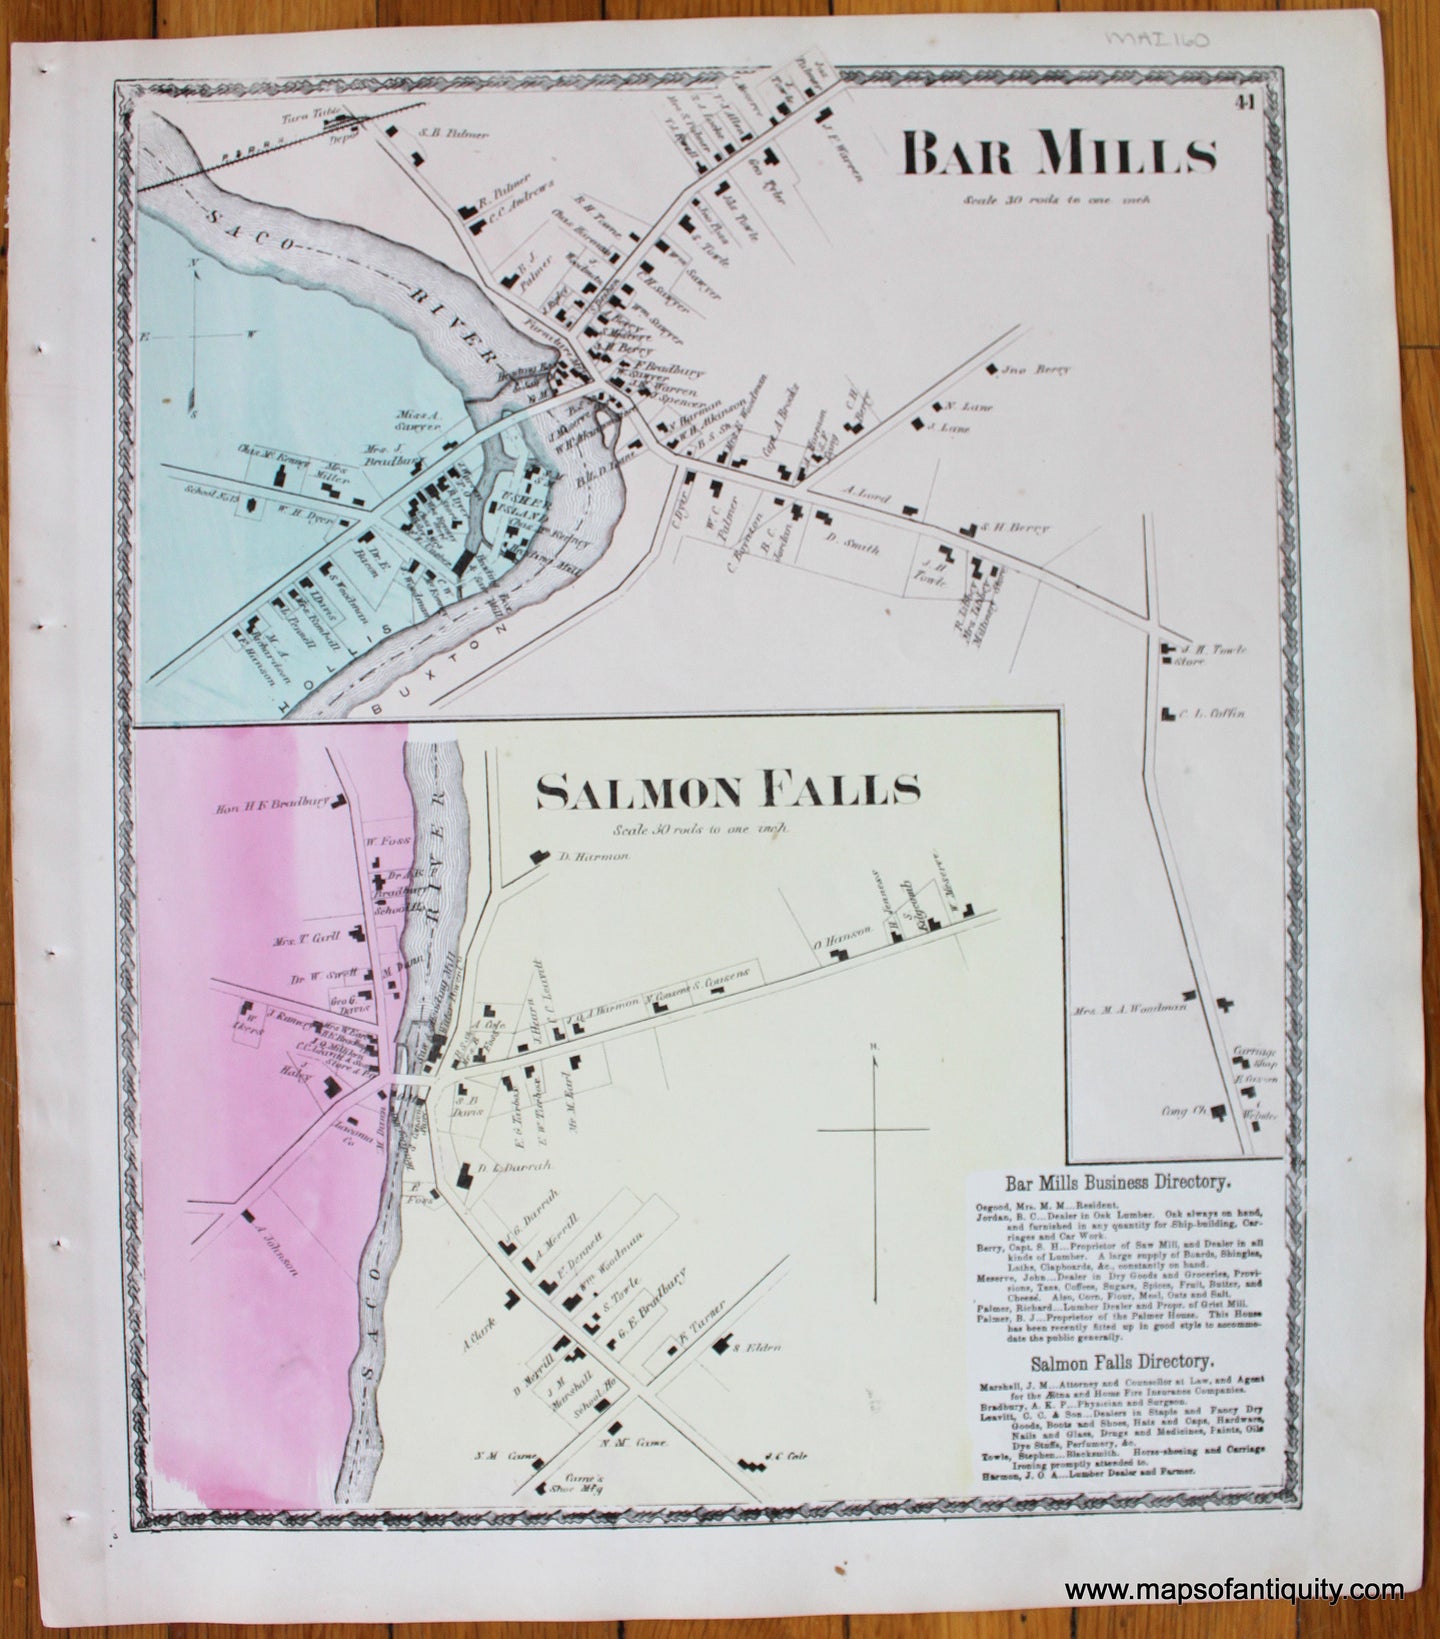 Bar-Mills-Salmon-Falls-York-County-Maine-Antique-Map-1872-Sanford-Everts-1870s-1800s-19th-century-Maps-of-Antiquity